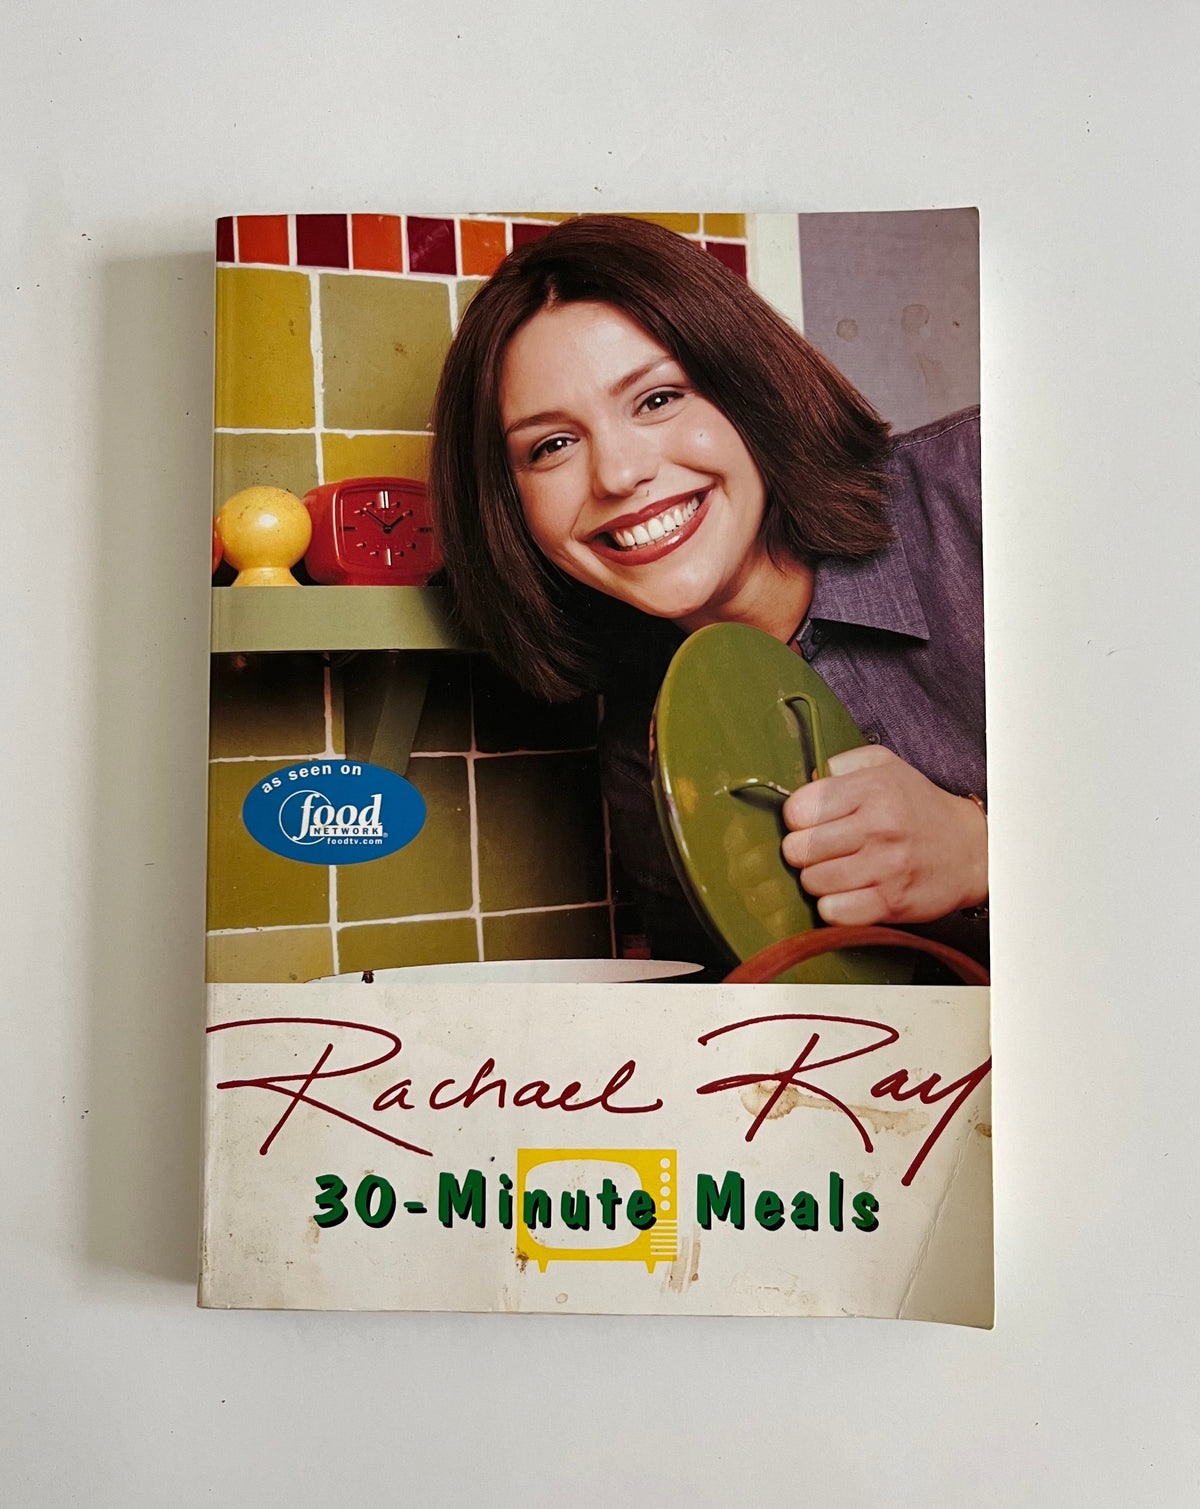 Rachael Ray: 30 Minute Meals